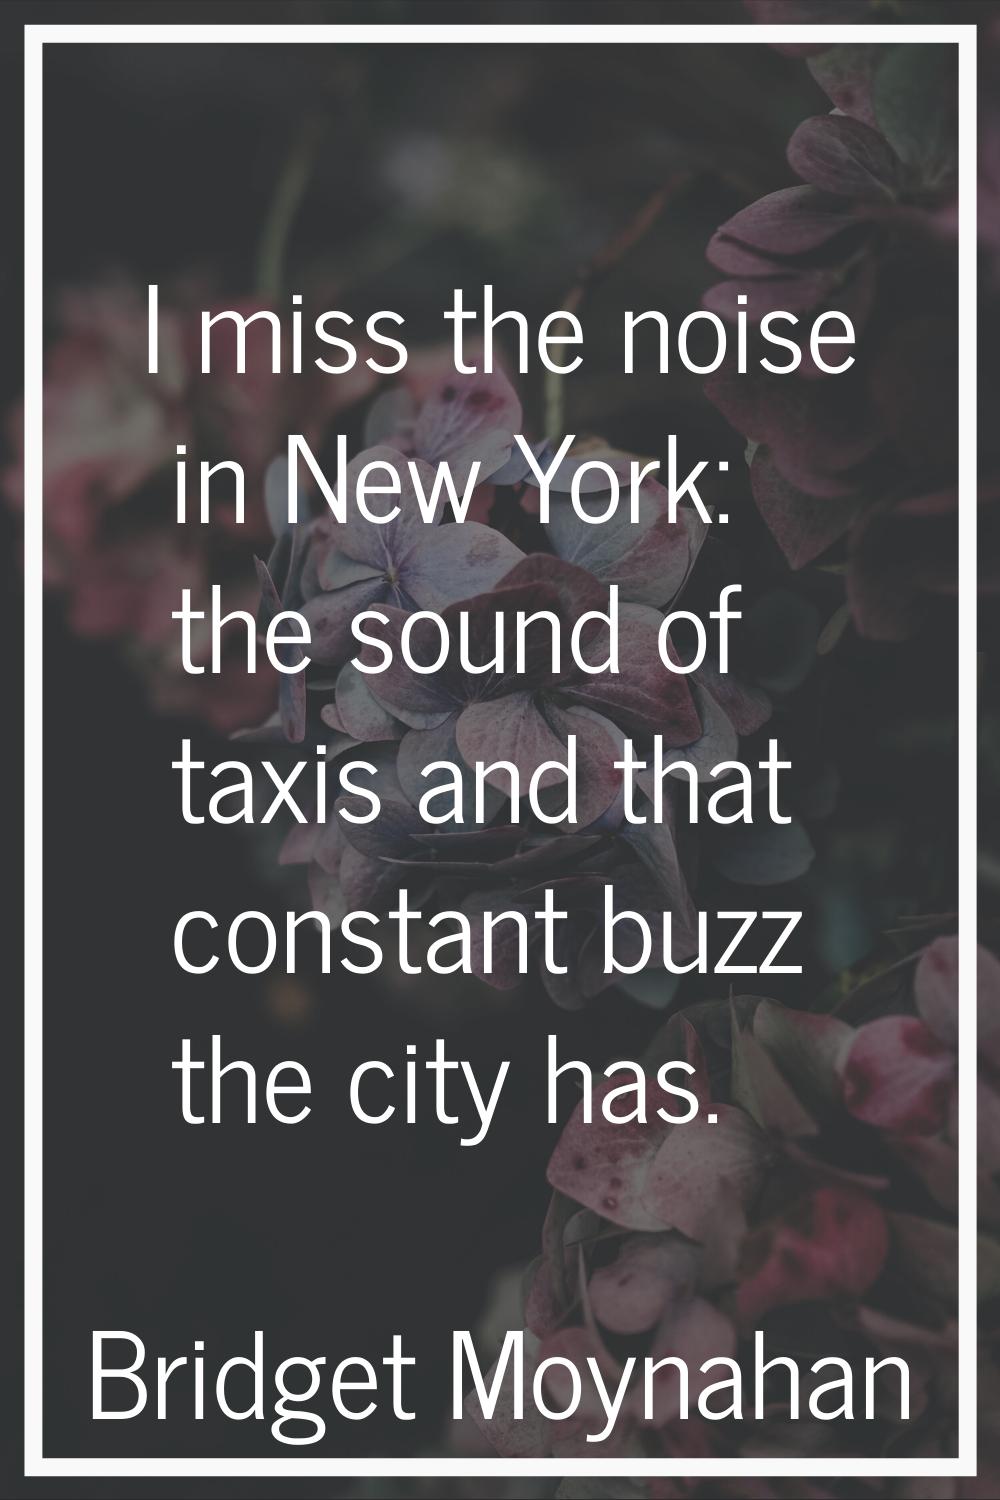 I miss the noise in New York: the sound of taxis and that constant buzz the city has.